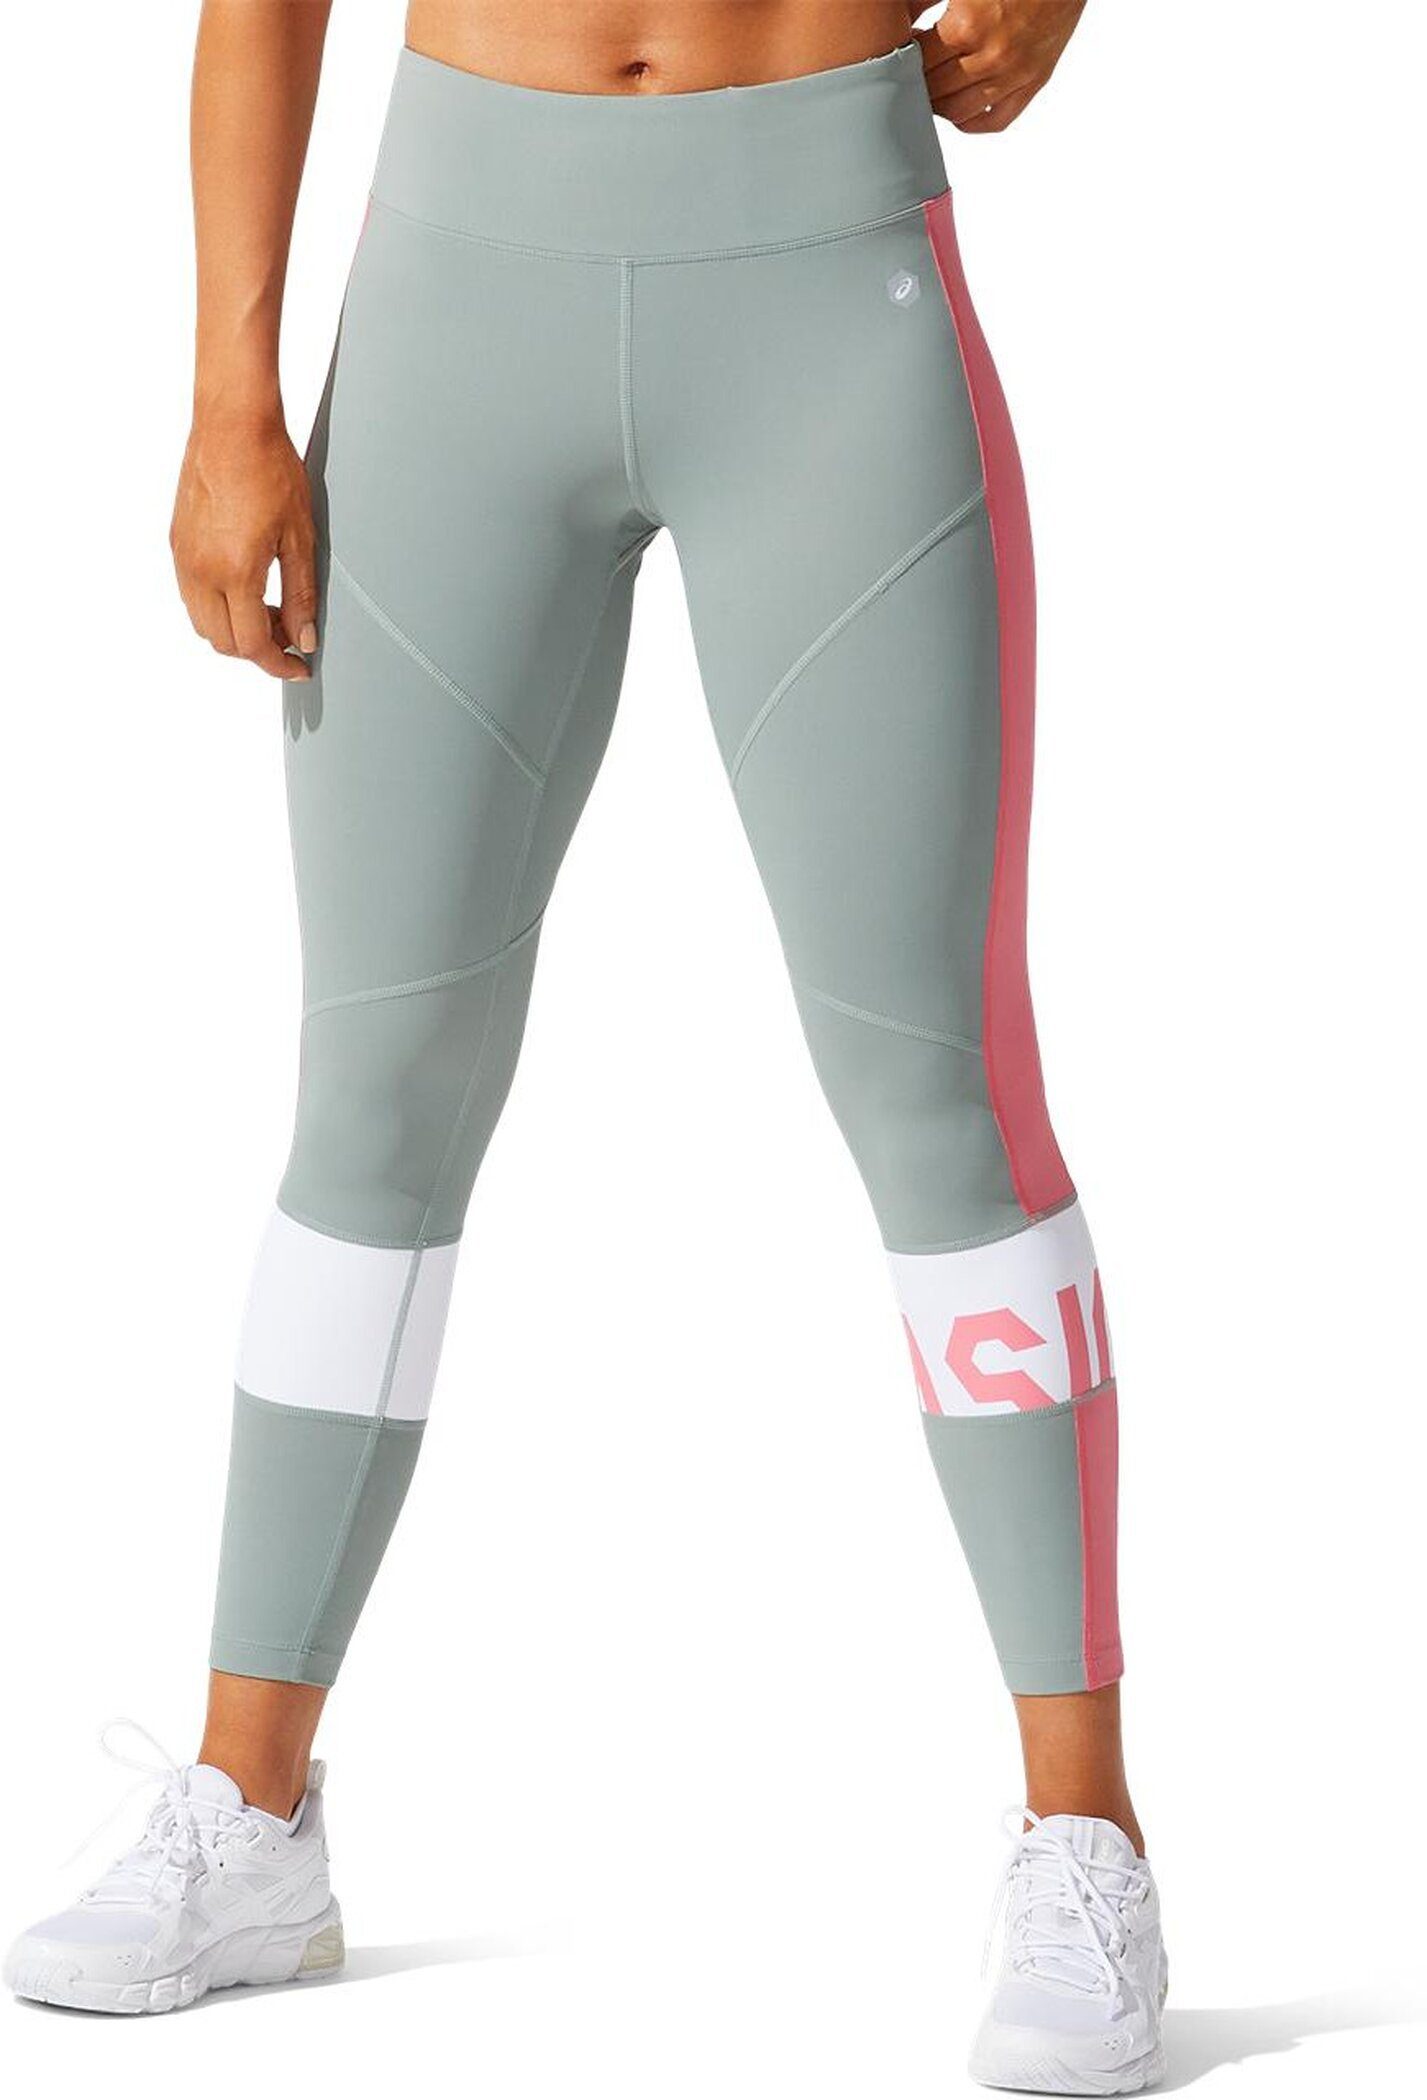 Funktionstights COLOR 2 CROPPED BLOCK TIGHT Asics